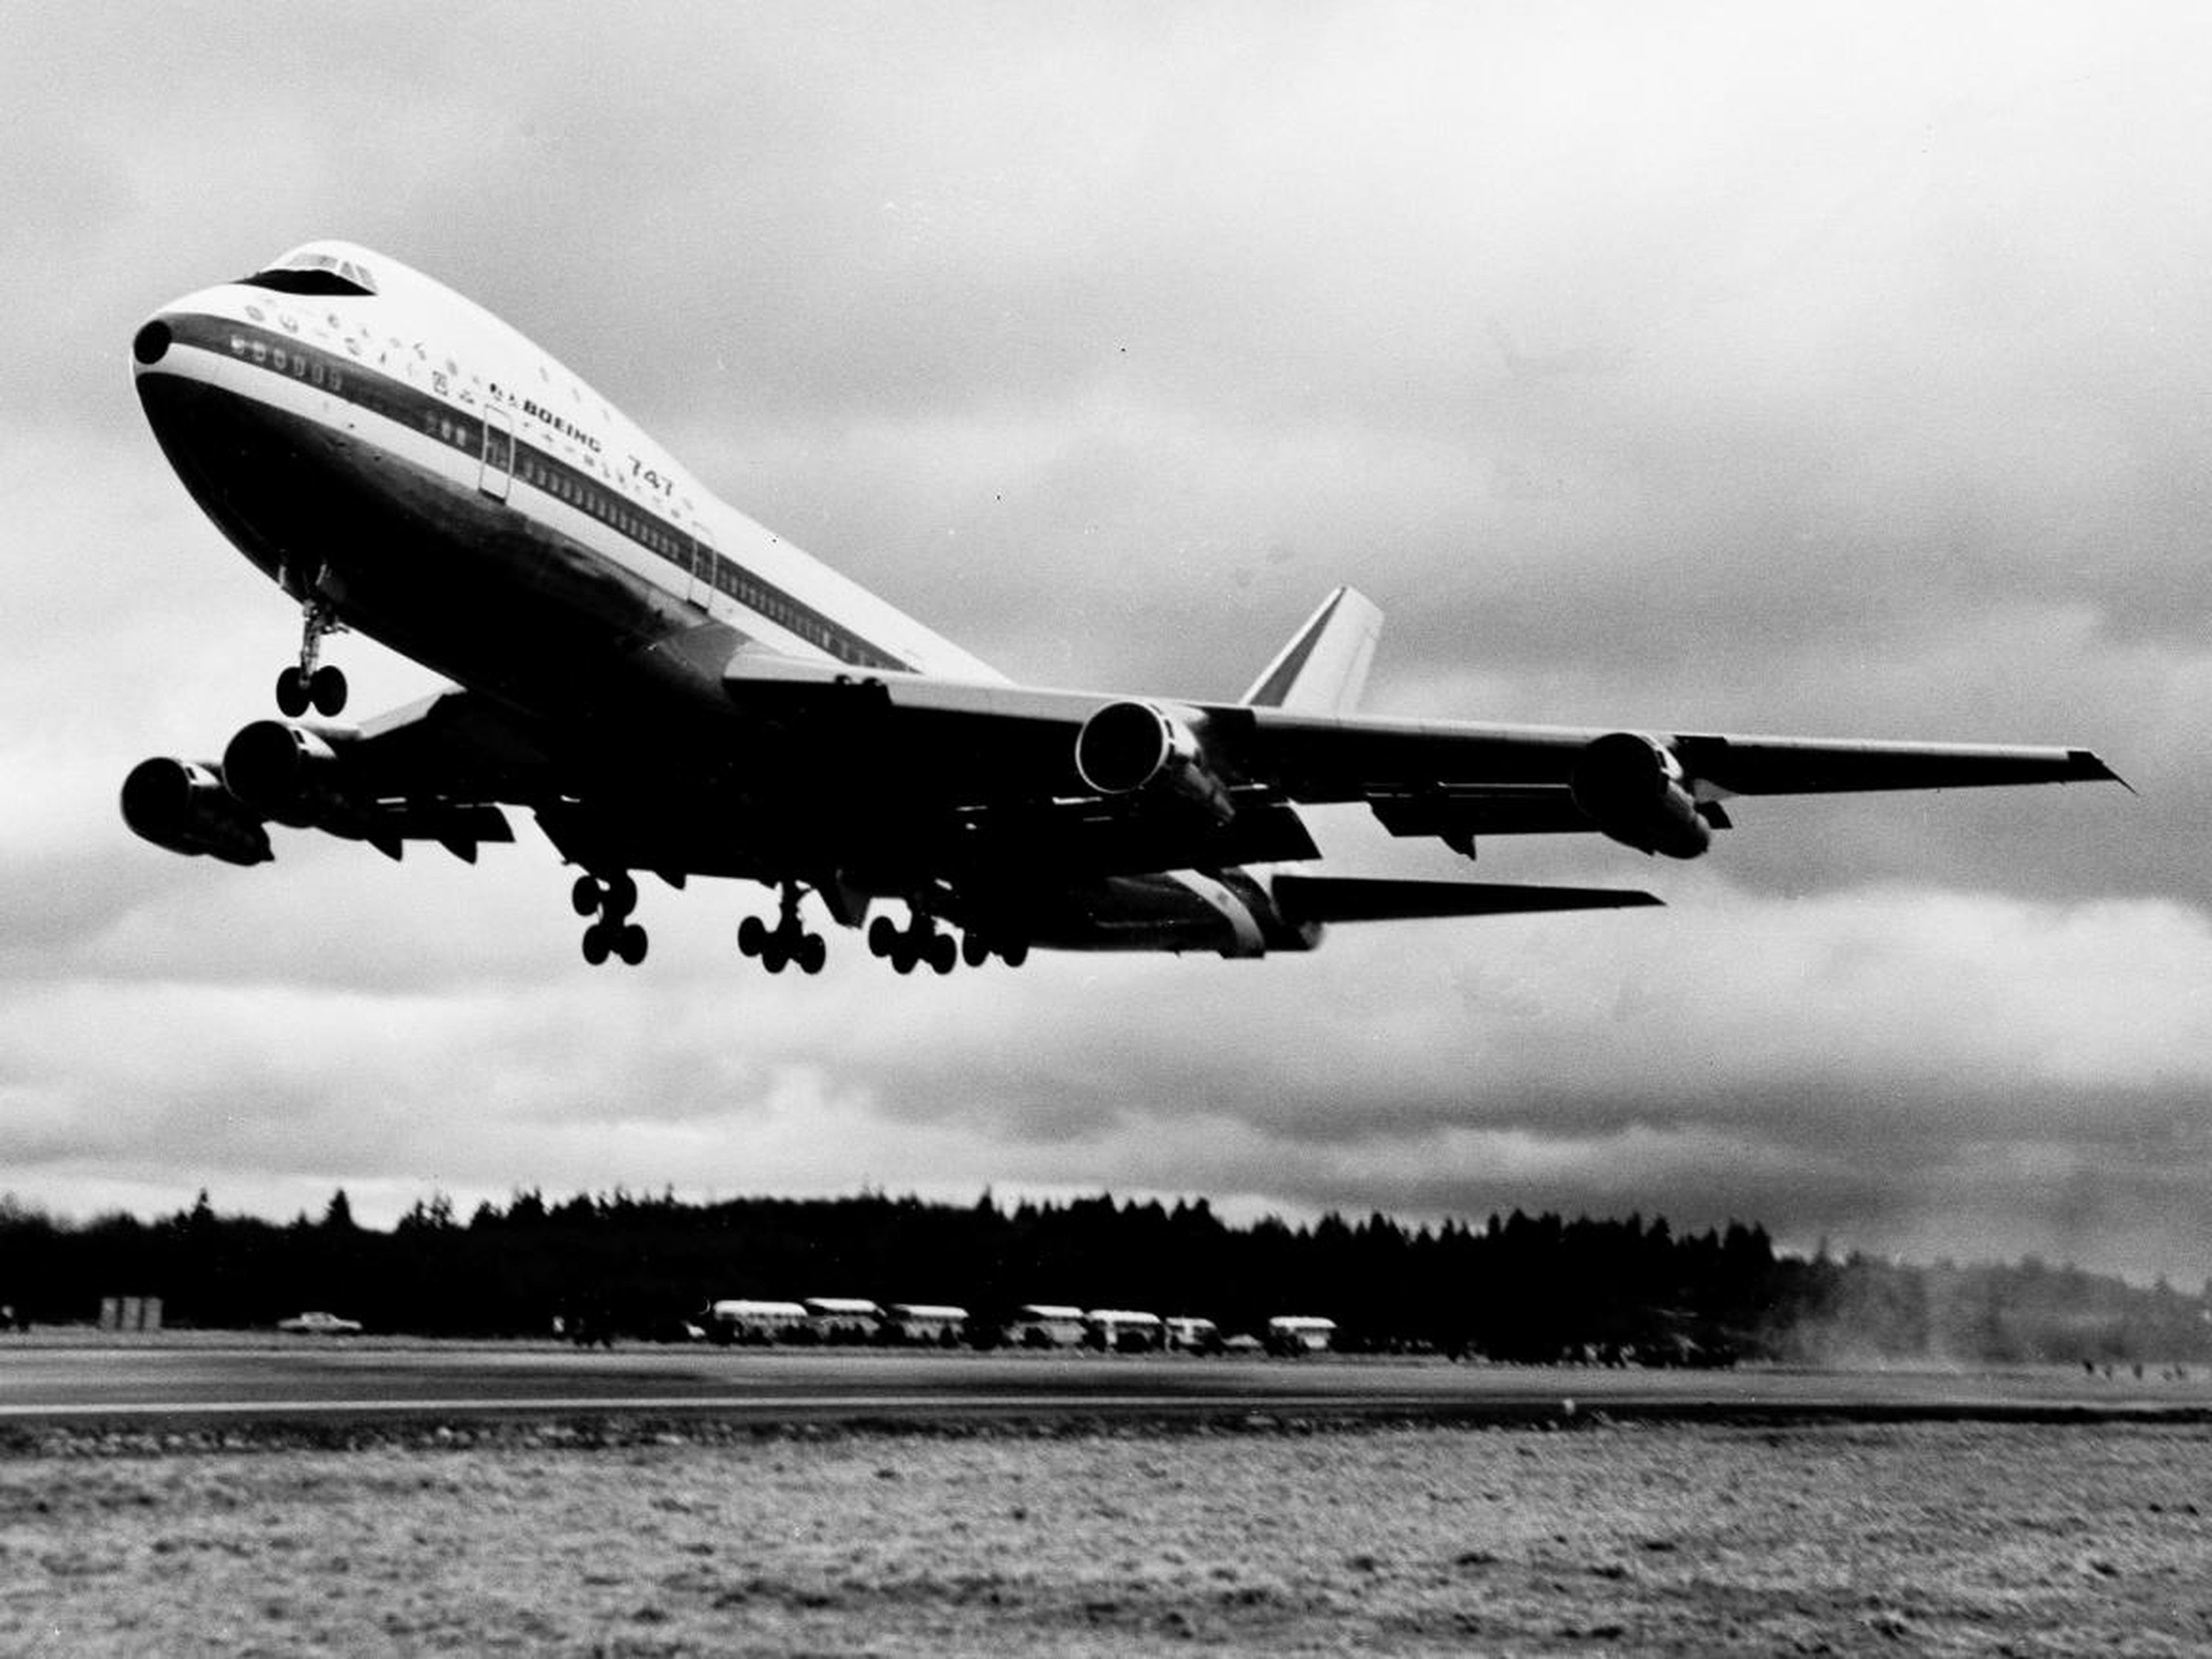 It spent the decade trying to break into a market dominated by the Boeing 747 jumbo jet.